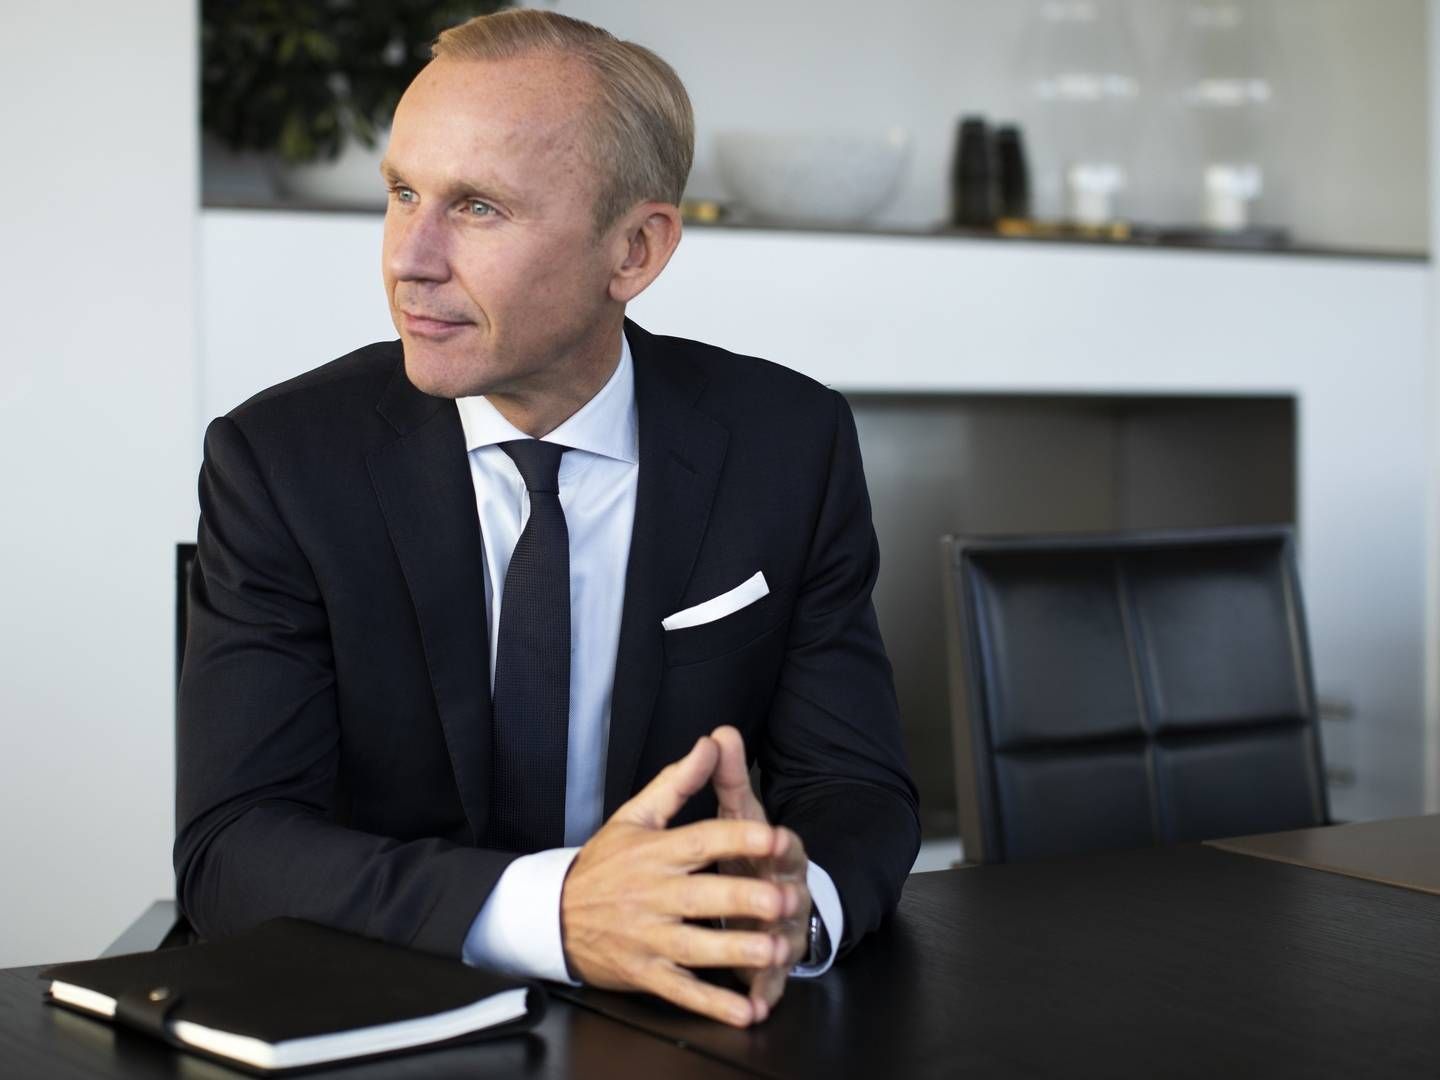 Christoffer Folkebo, CEO at Carneo, the largest independent asset manager in the Nordics. | Photo: PR/Carneo